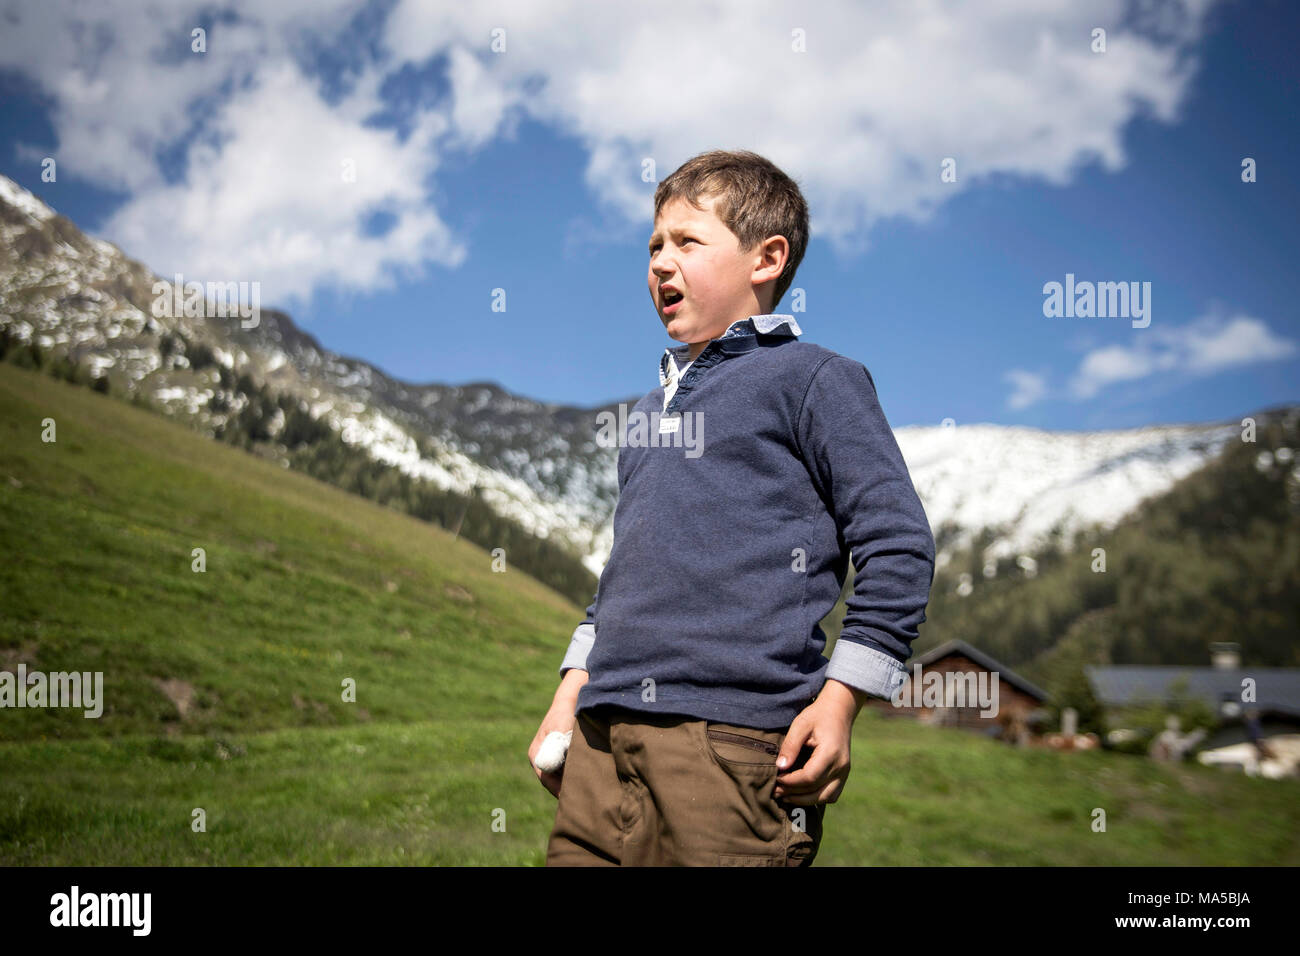 Elias, son of the alpine farmers on the Karalm close Rauris calls the cows for milking Stock Photo